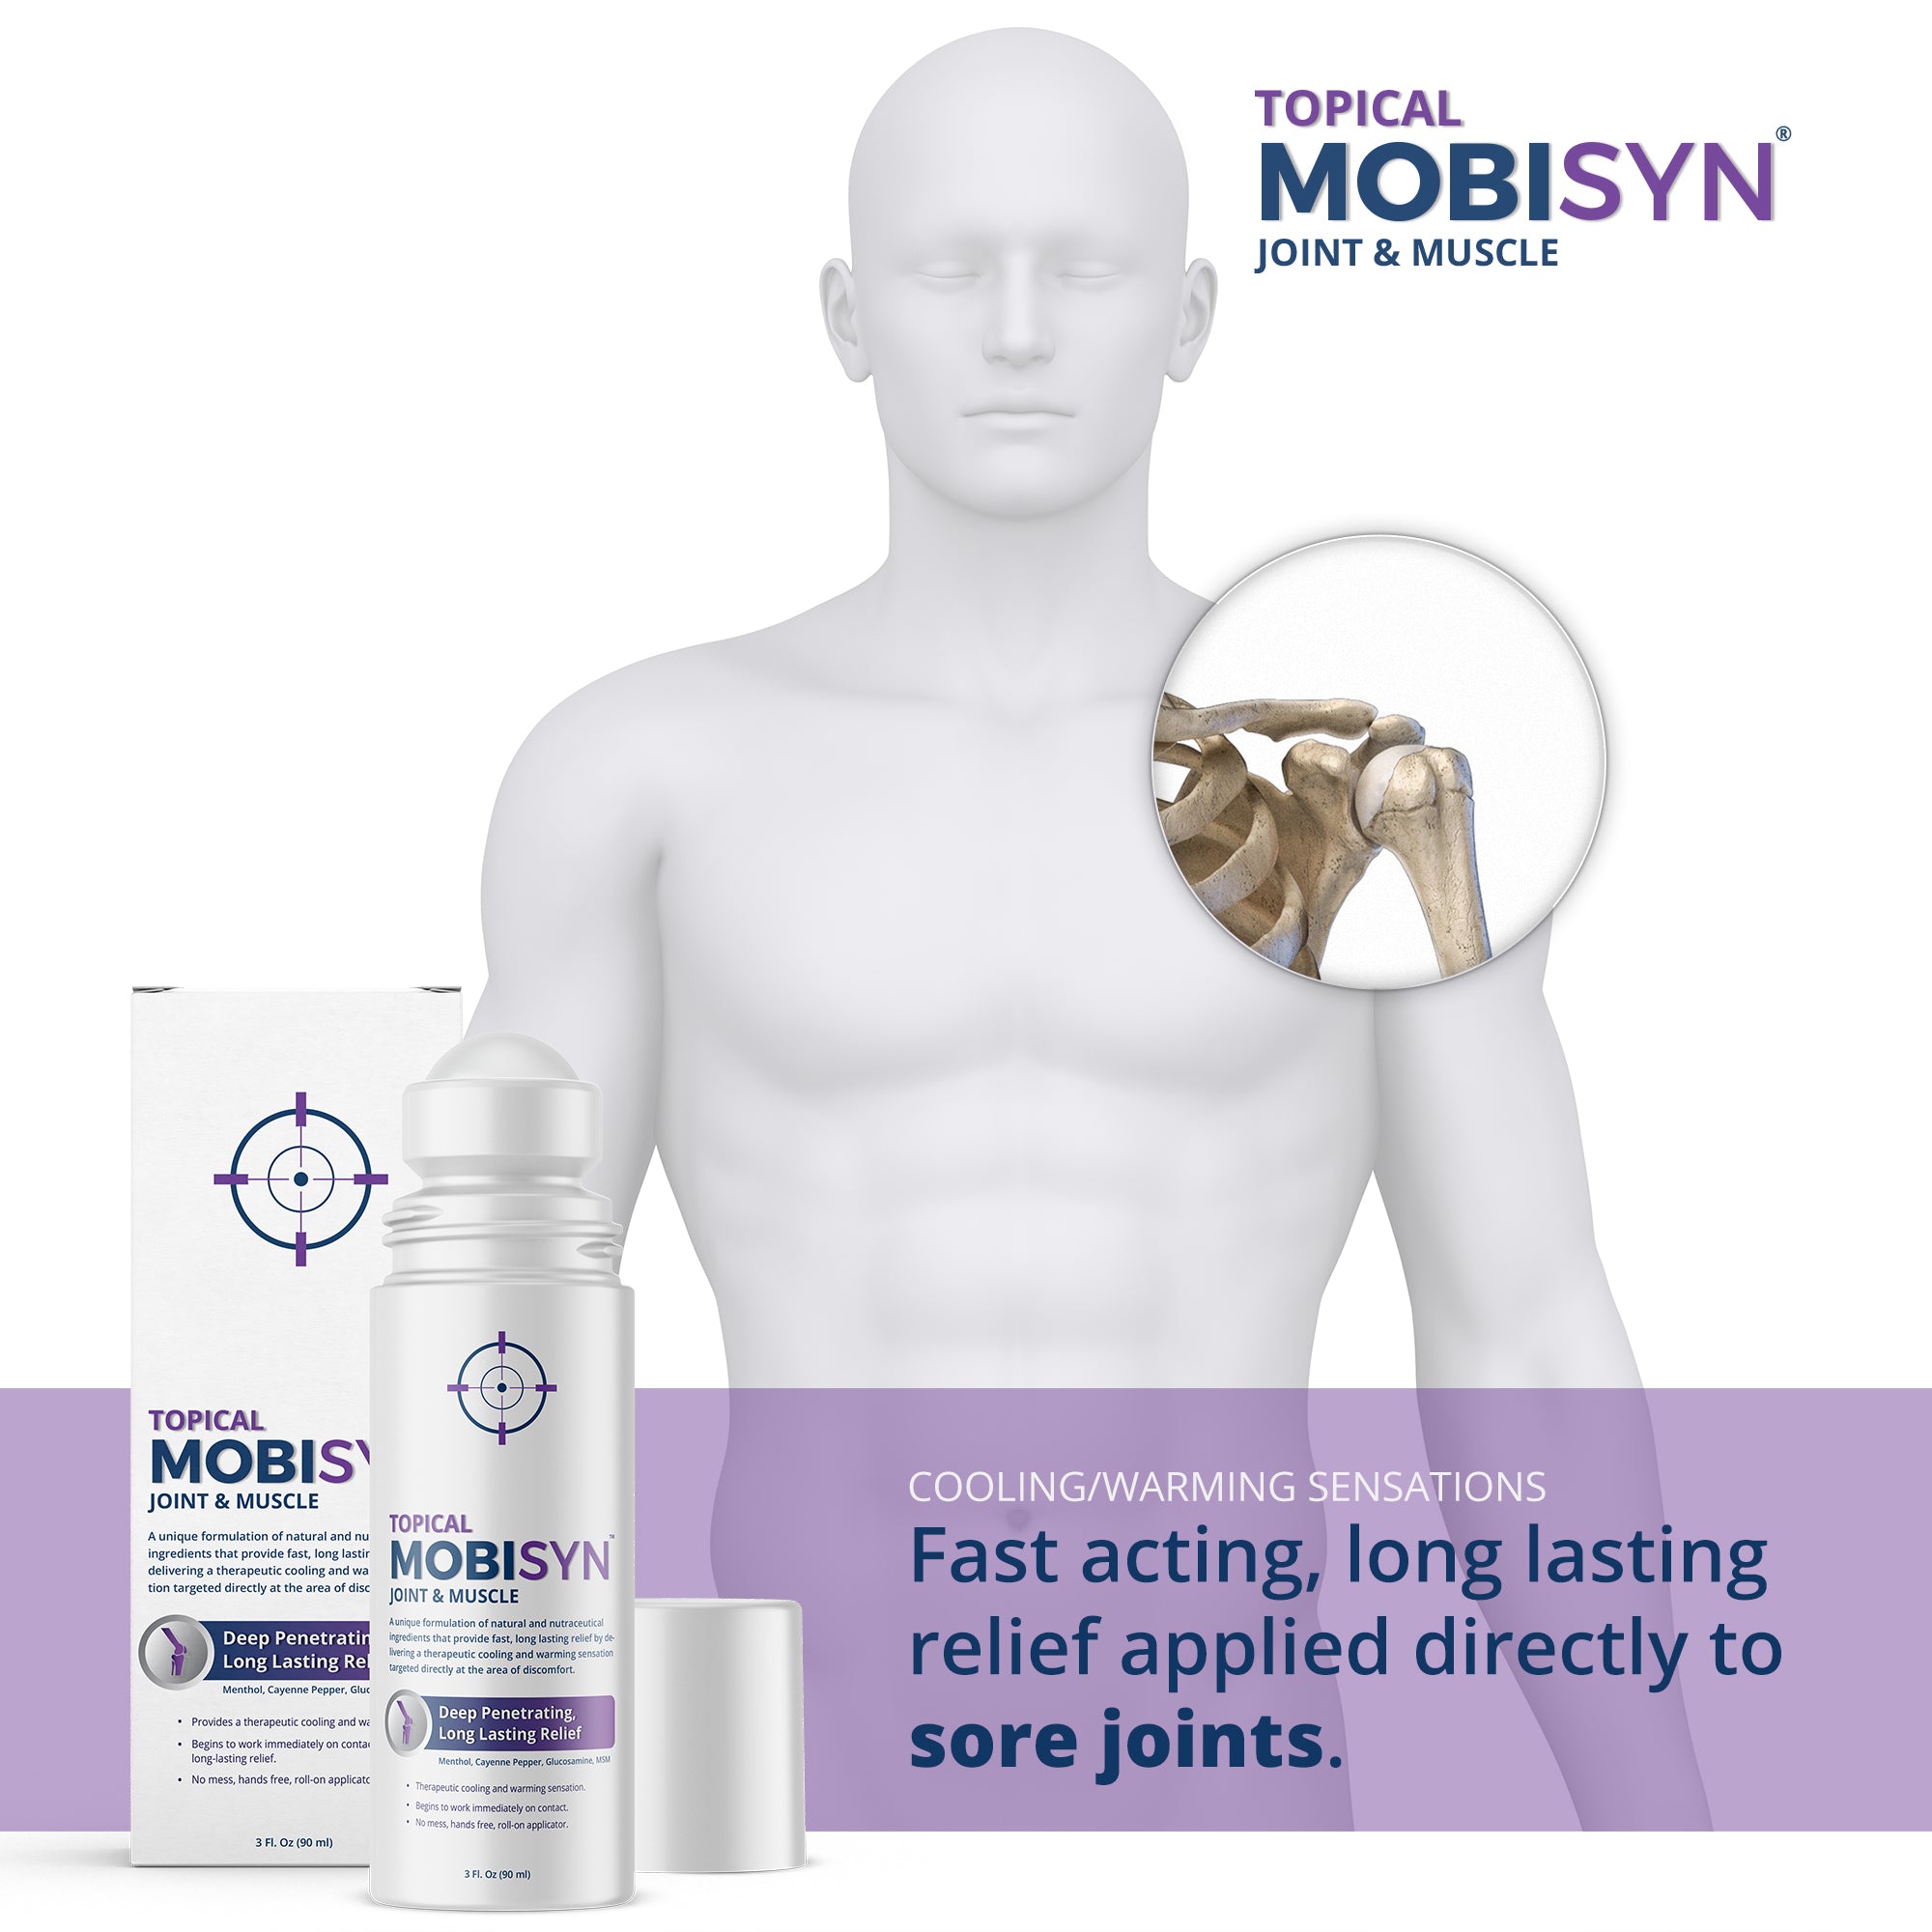 Topical MOBISYN Joint & Muscle Gel